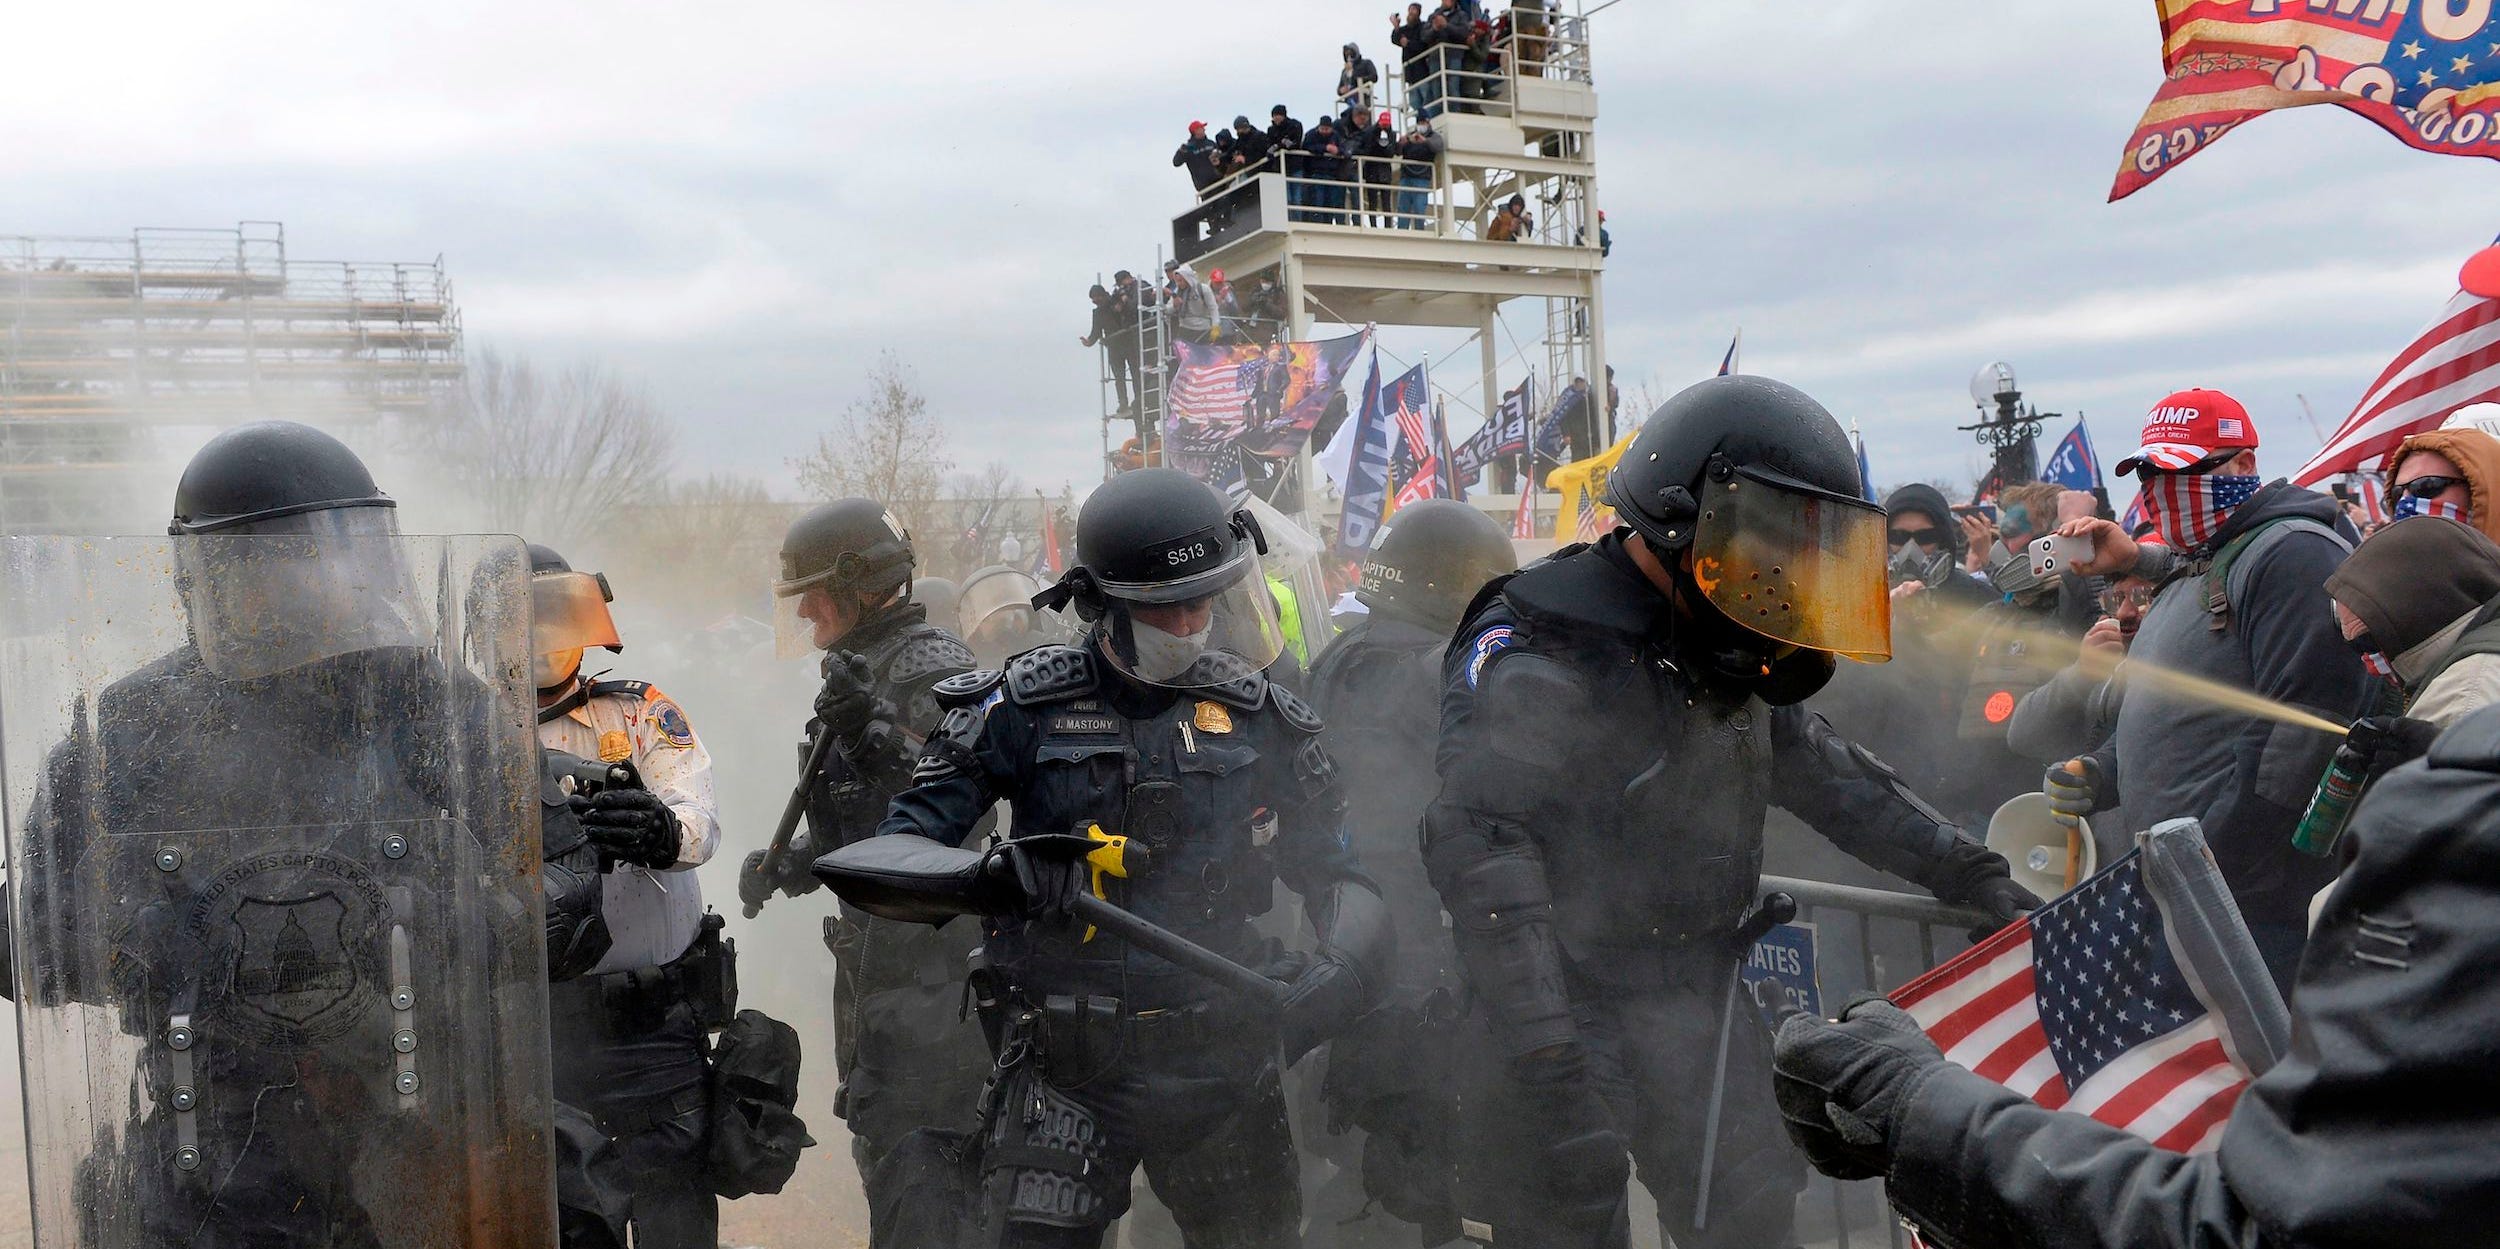 Trump supporters clash with police and security forces as they try to storm the US Capitol in Washington, DC on January 6, 2021.